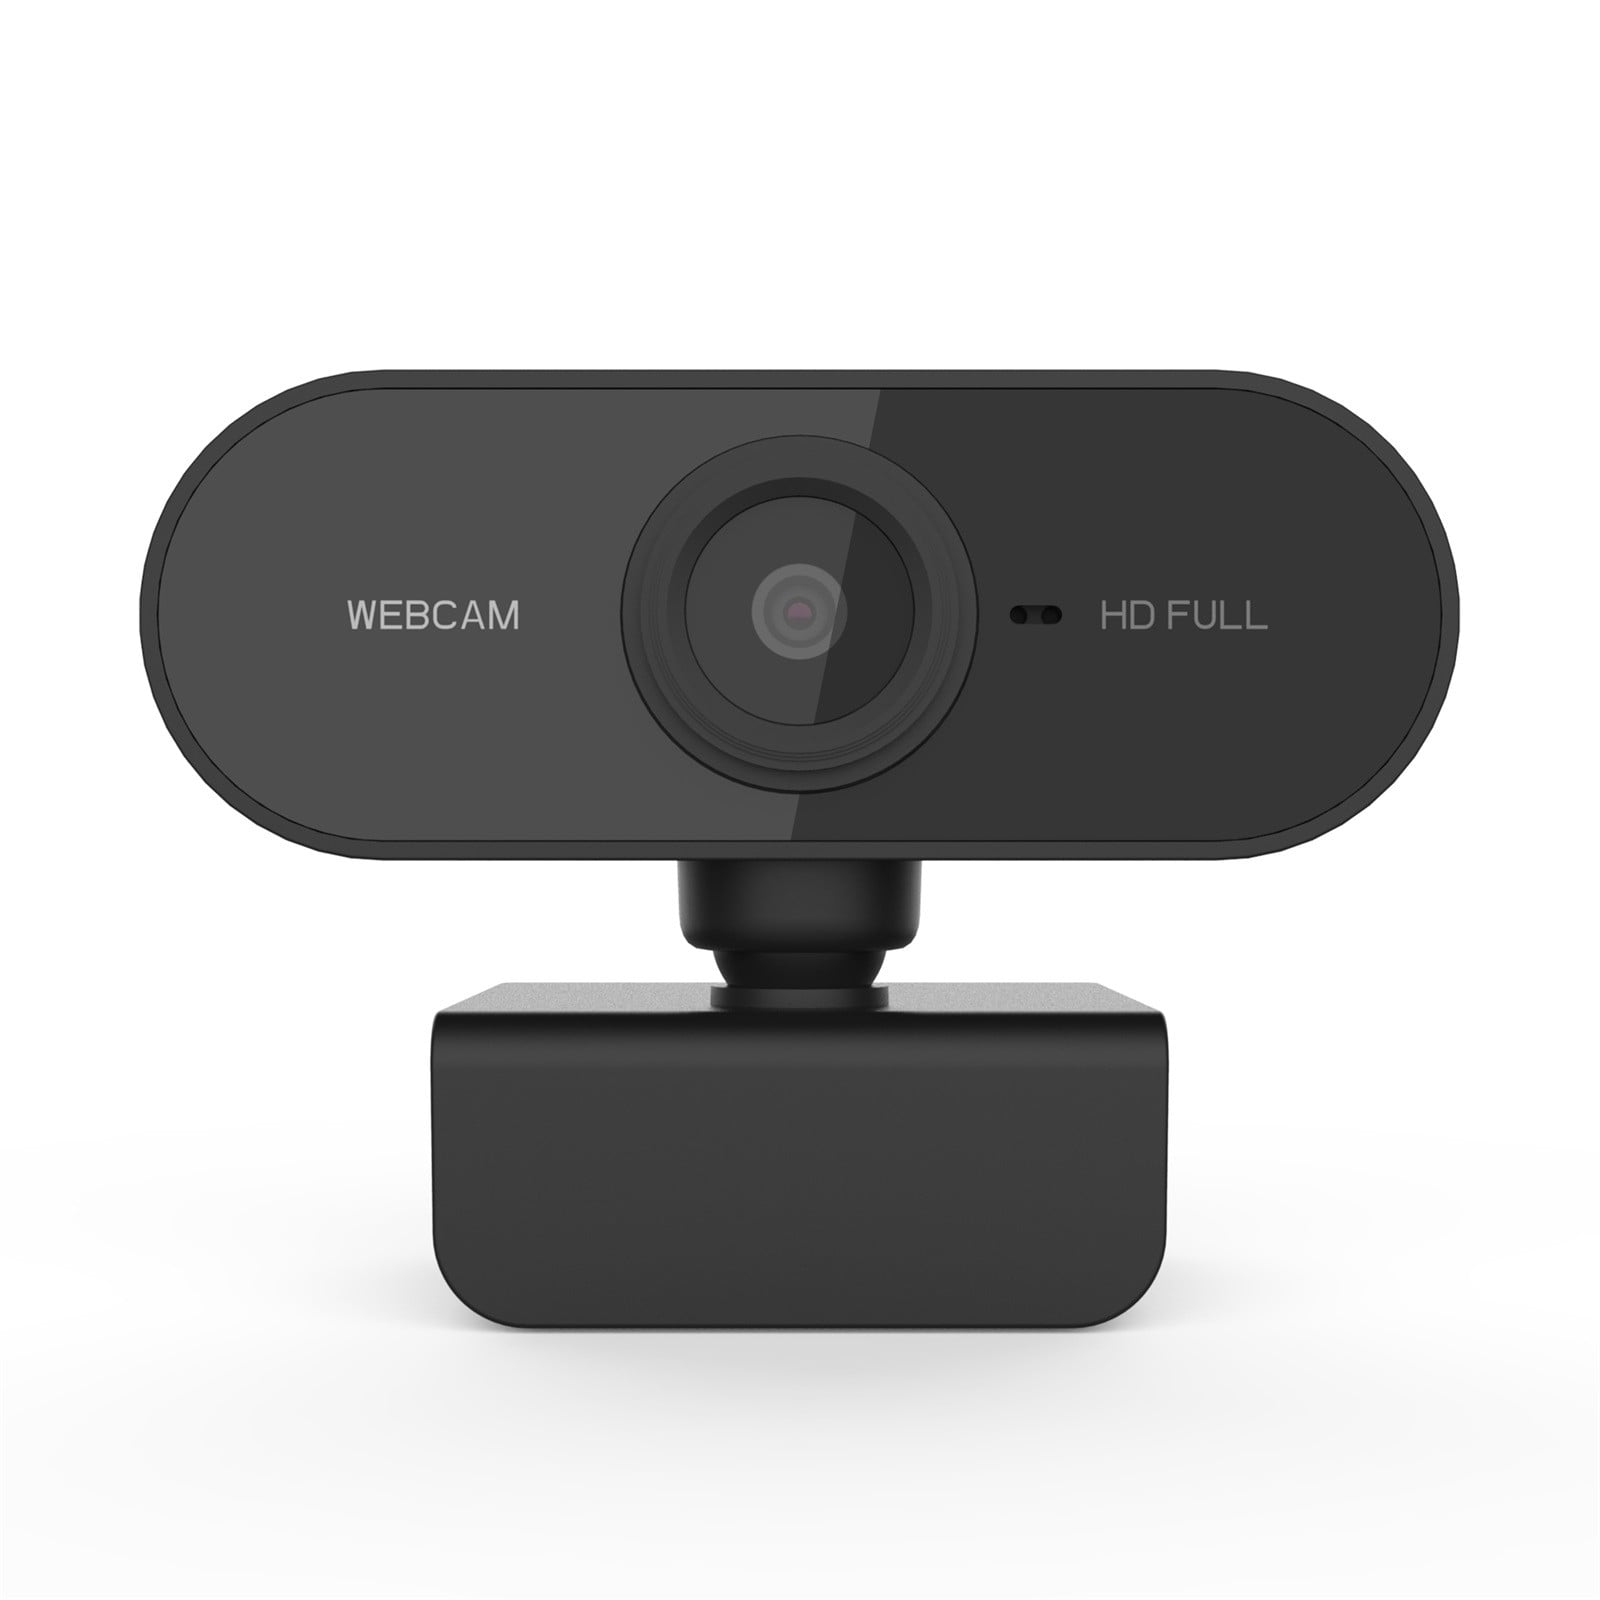 EMEET 4K Webcam S600, 1080P 60FPS Webcam with 2 Noise Reduction Mics,  Privacy Cover, Autofocus, Adjustable FOV, for Gaming, Video Calls